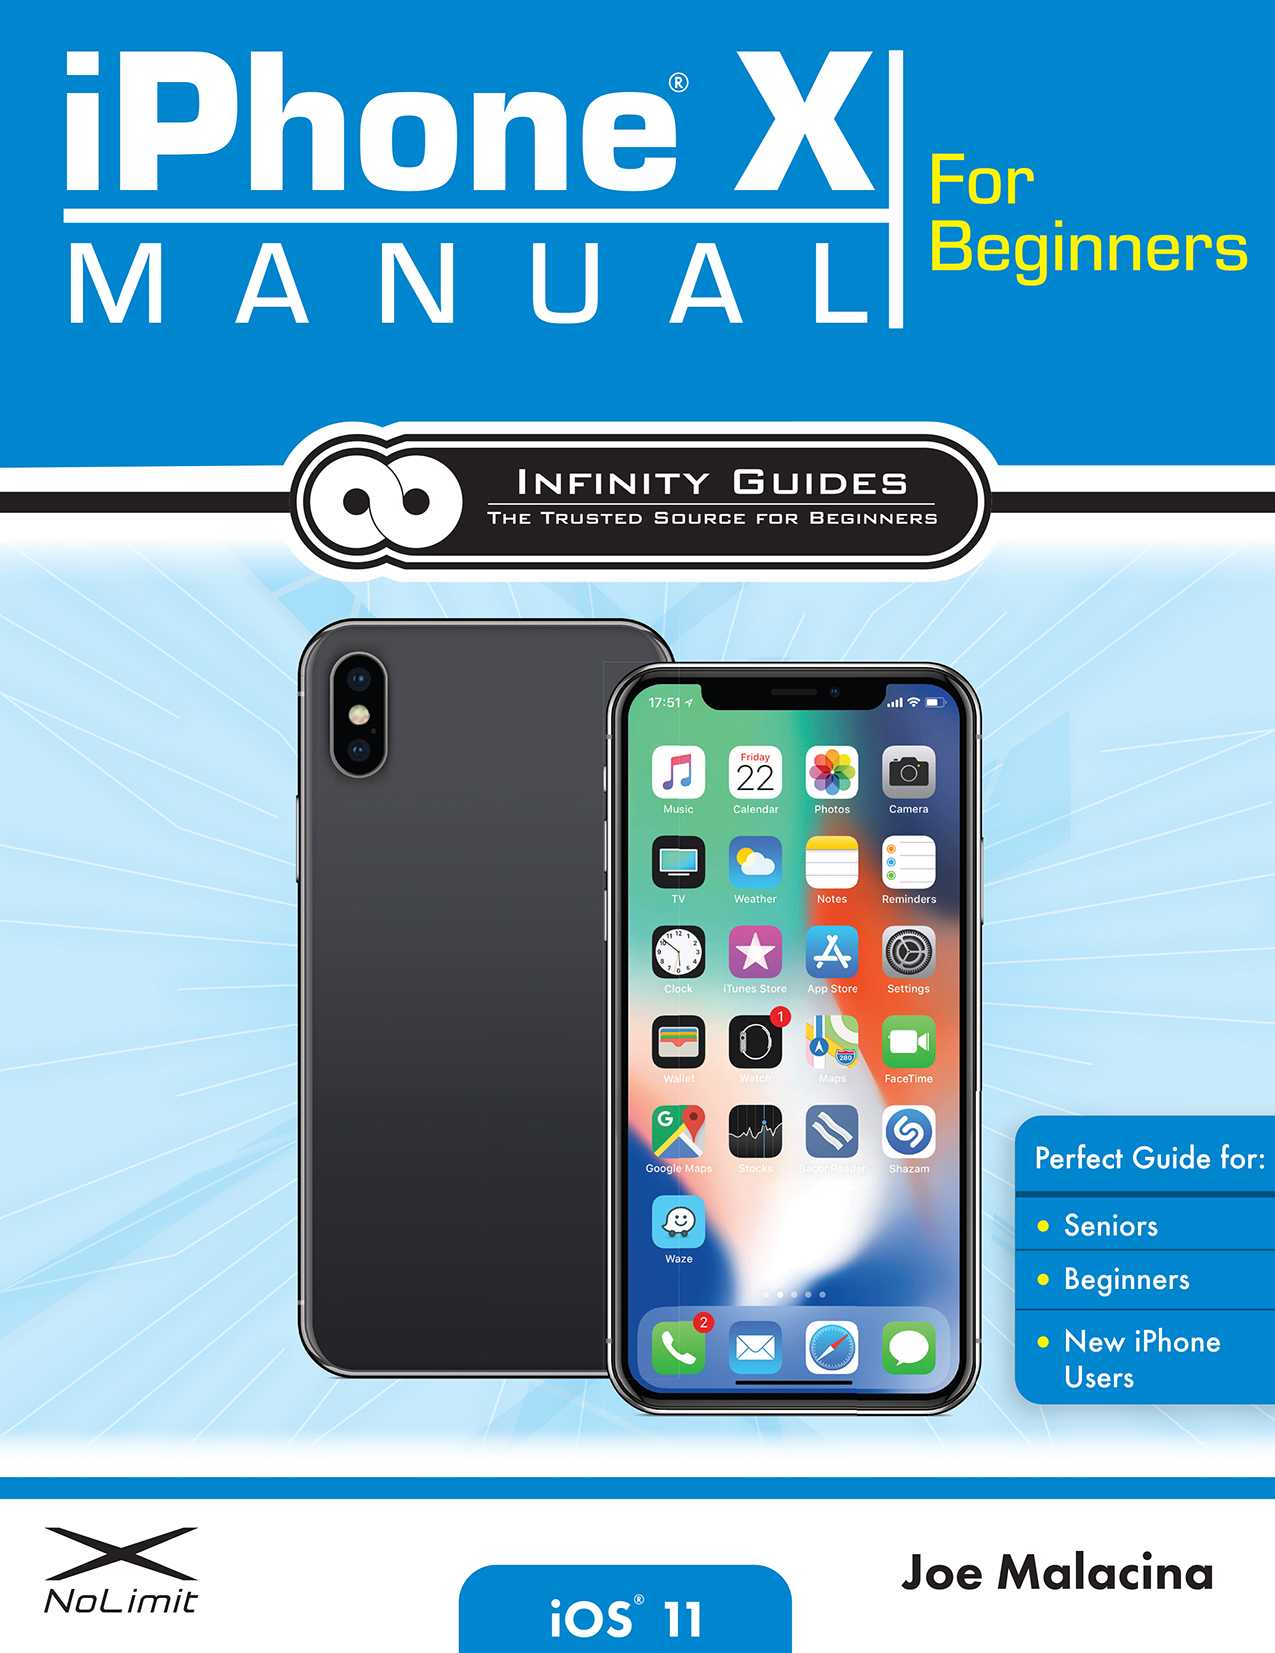 iPhone Manual for Beginners